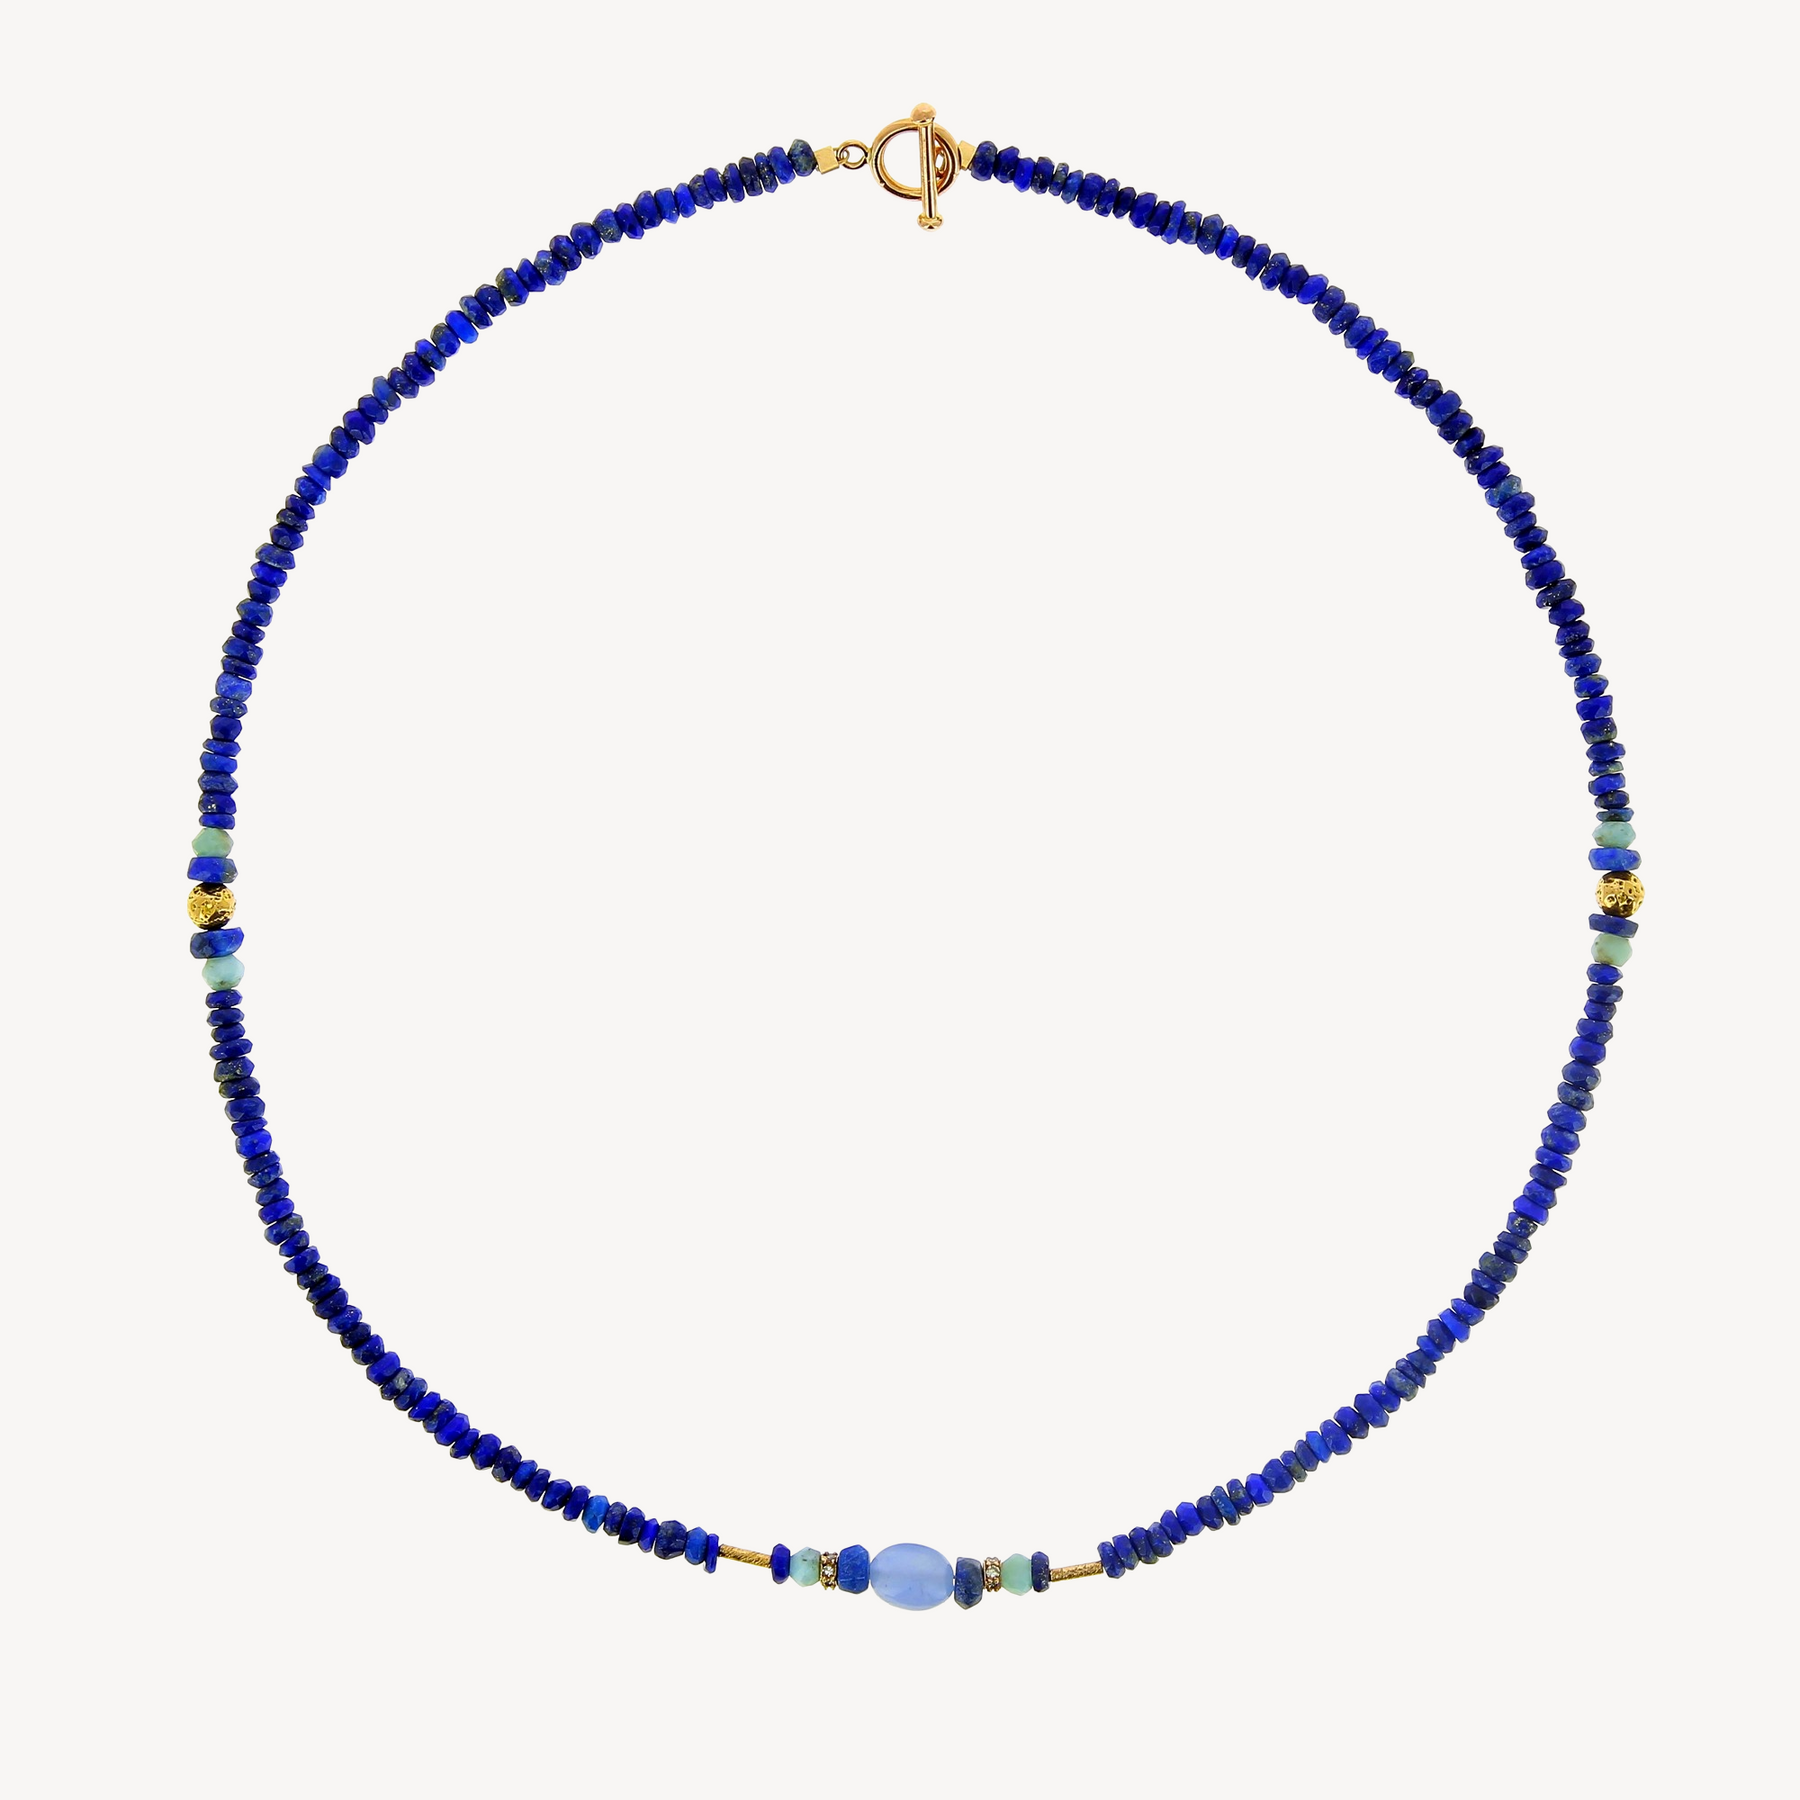 Lapis and Calcite Necklace